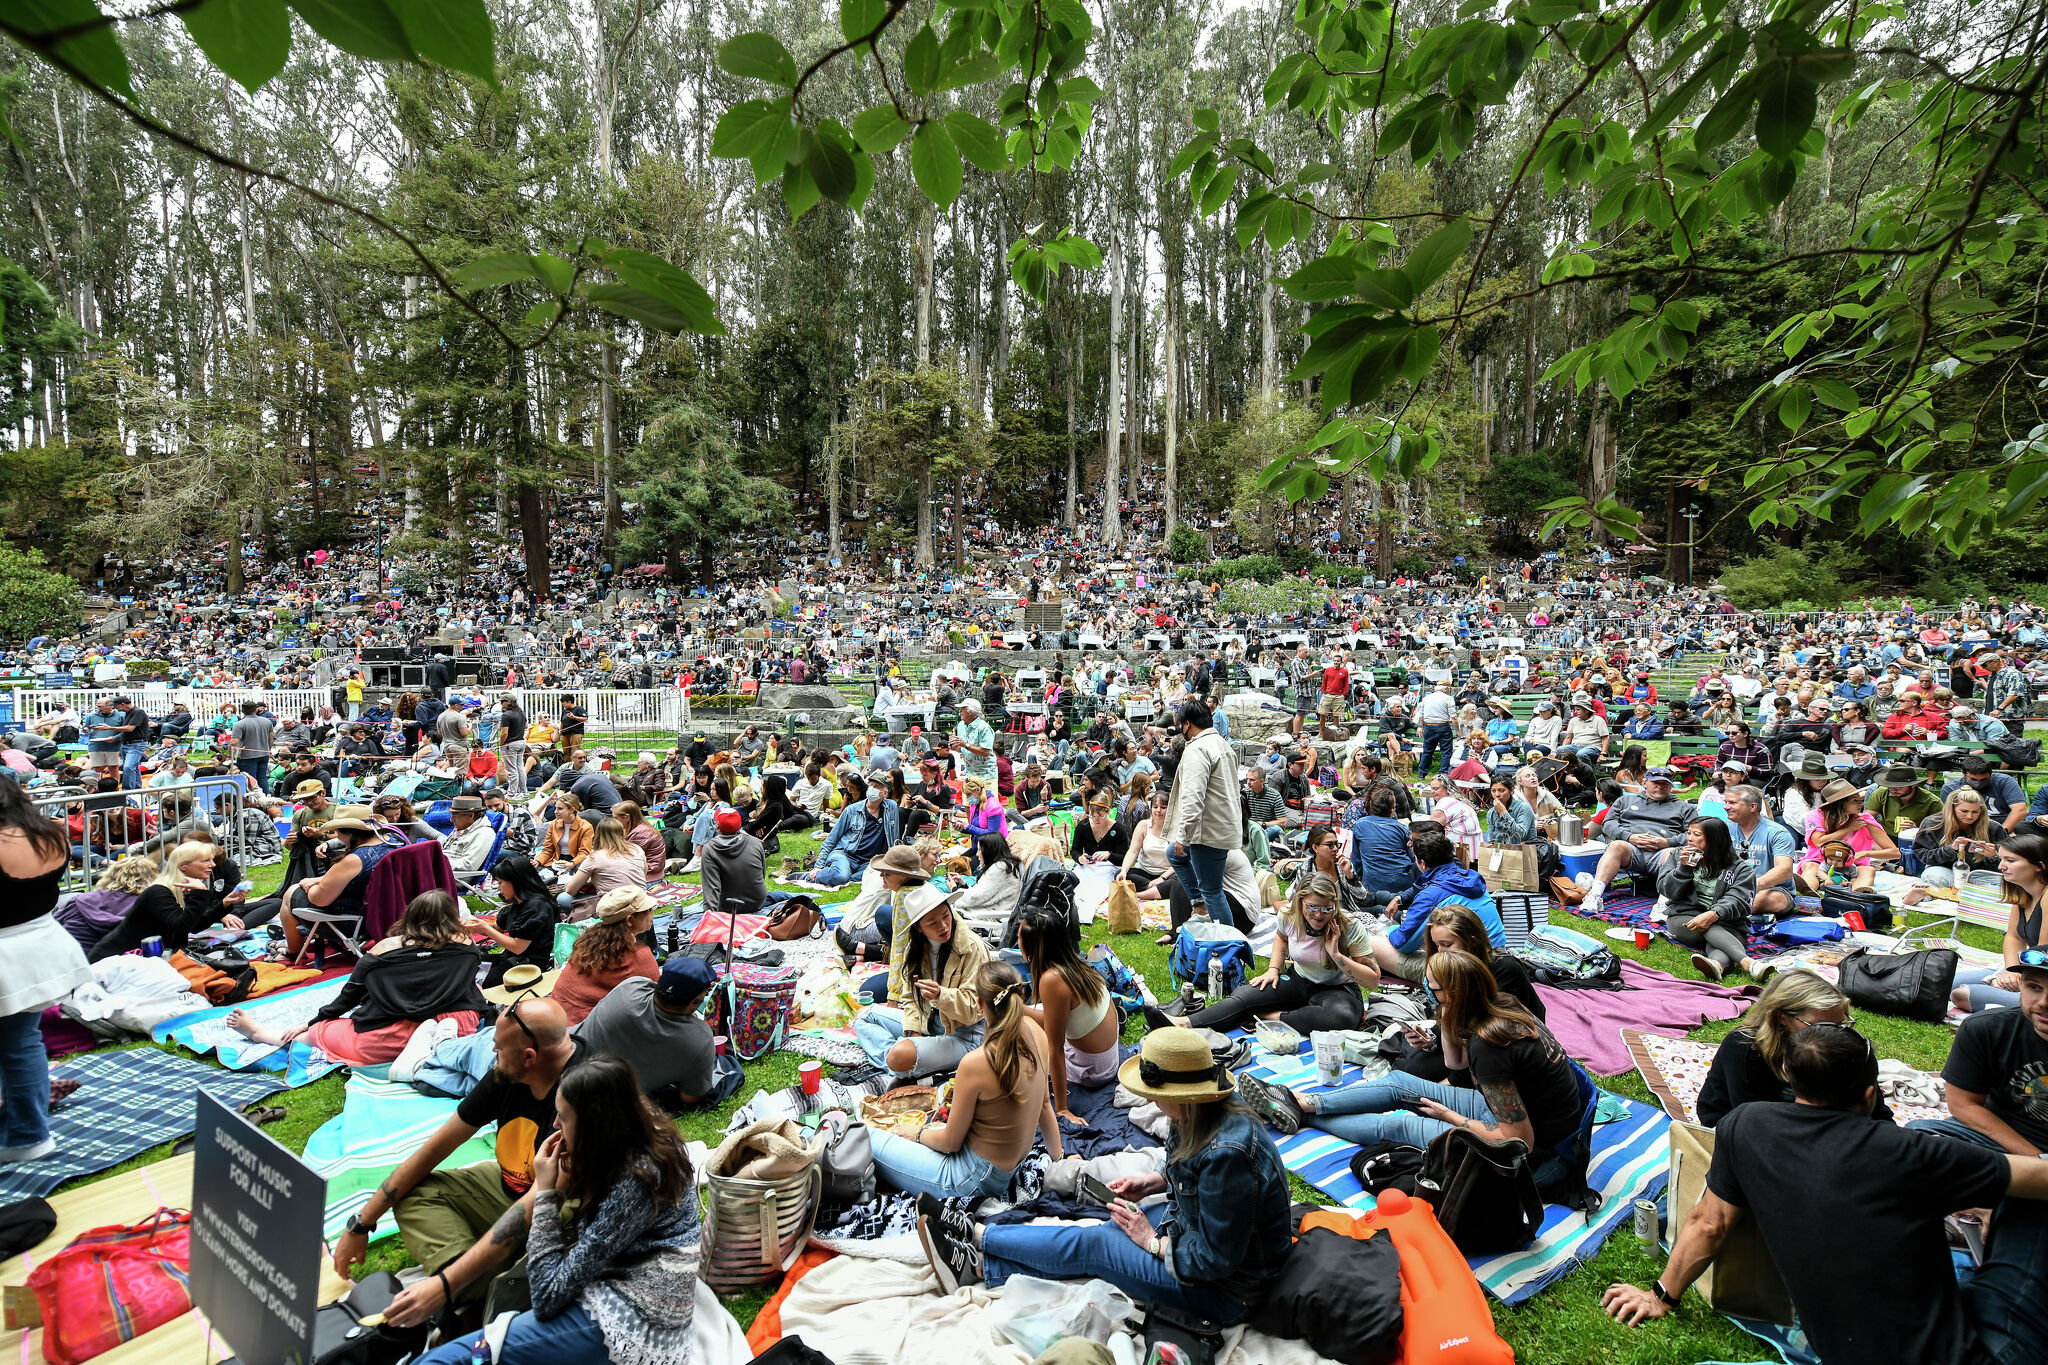 Leaked lineup for SF’s Stern Grove was an accident, Muni says